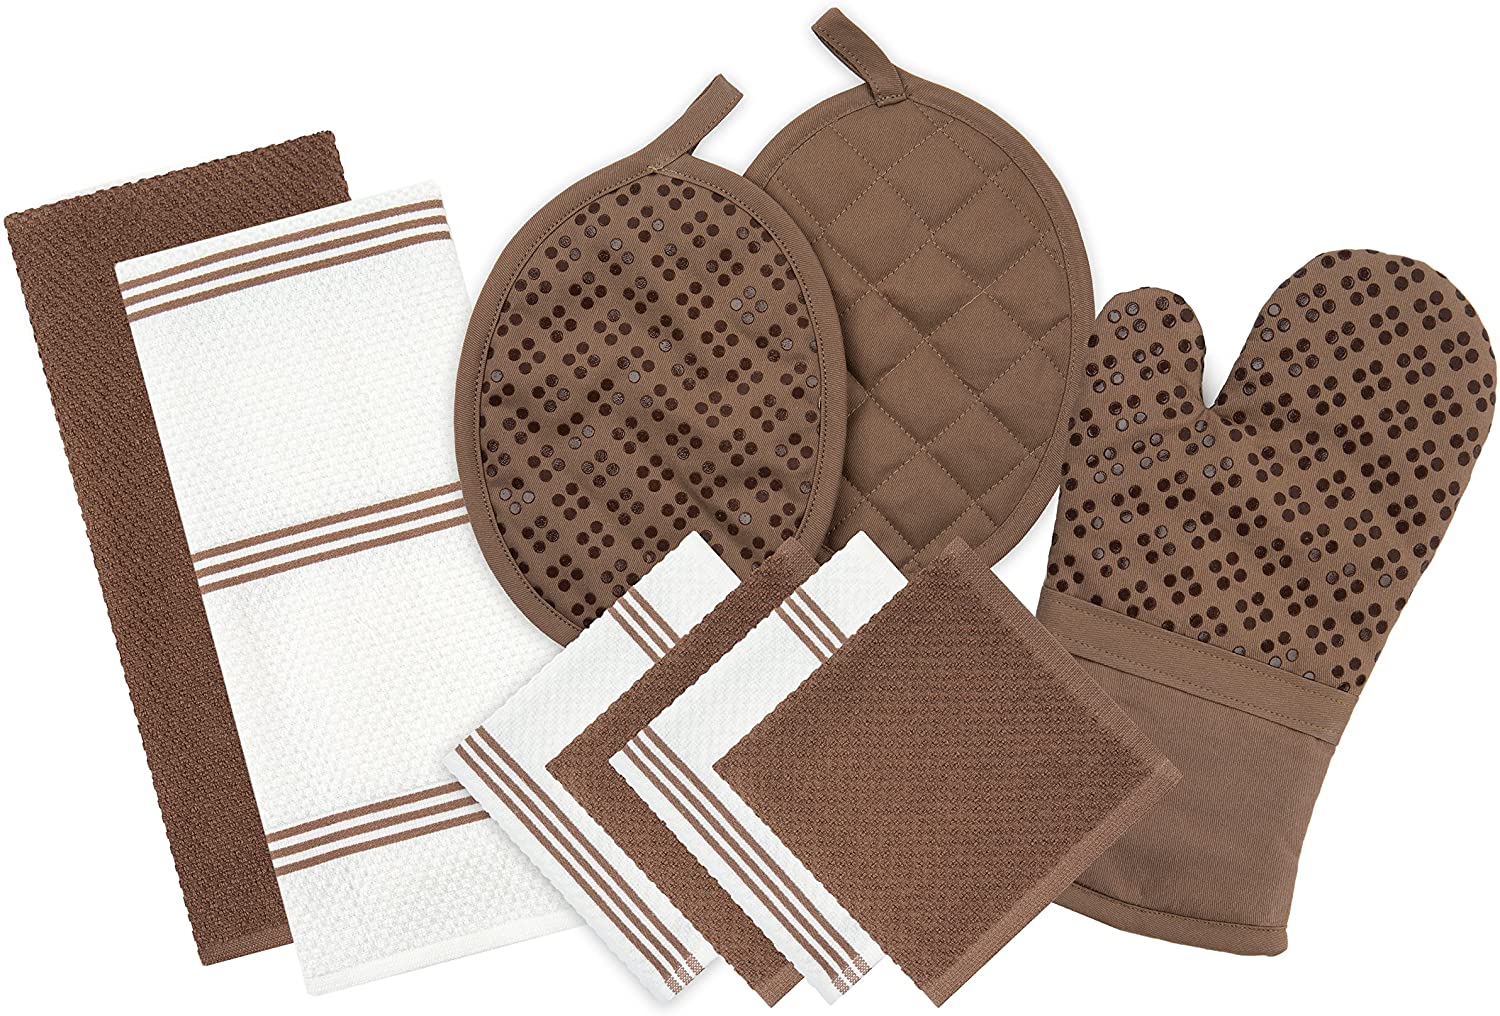 Sticky Toffee Kitchen Towels Dishcloths Oven Mitts and Pot Holders Set of  9, 100% Cotton Terry, Non-Slip Silicone, Brown